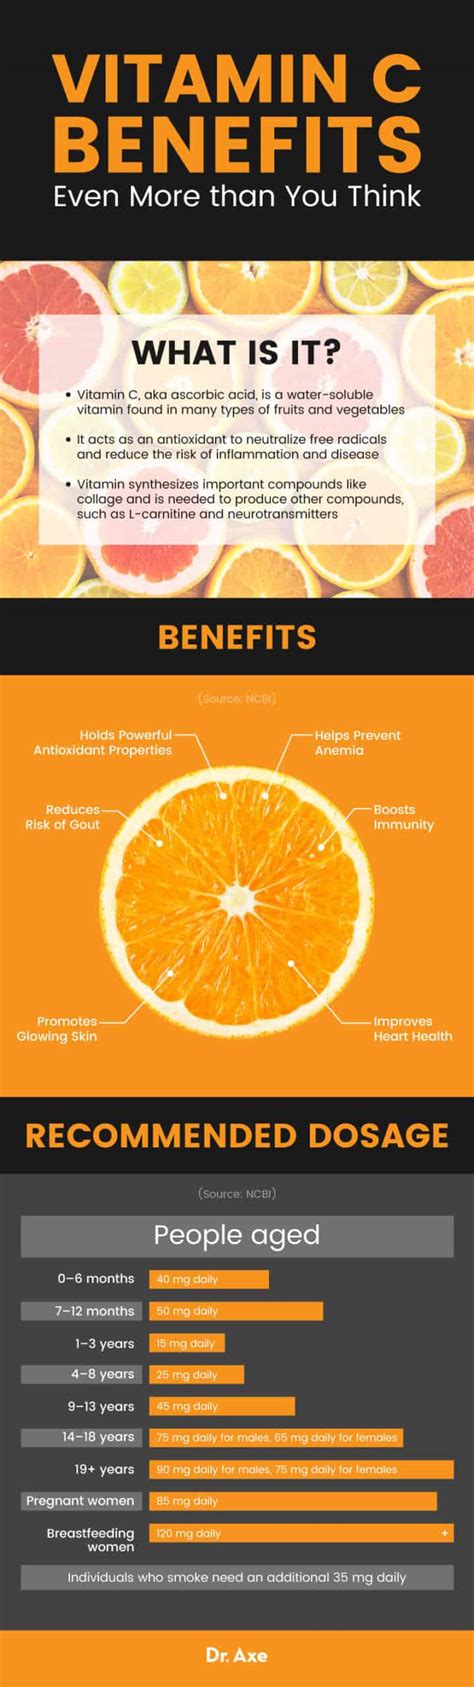 However, unless advised by your treatment of scurvy involves either using a vitamin c supplement or increasing intake of vitamin c foods under the direction of a health care professional. Vitamin C Benefits and Dosage Recommendations - Dr. Axe